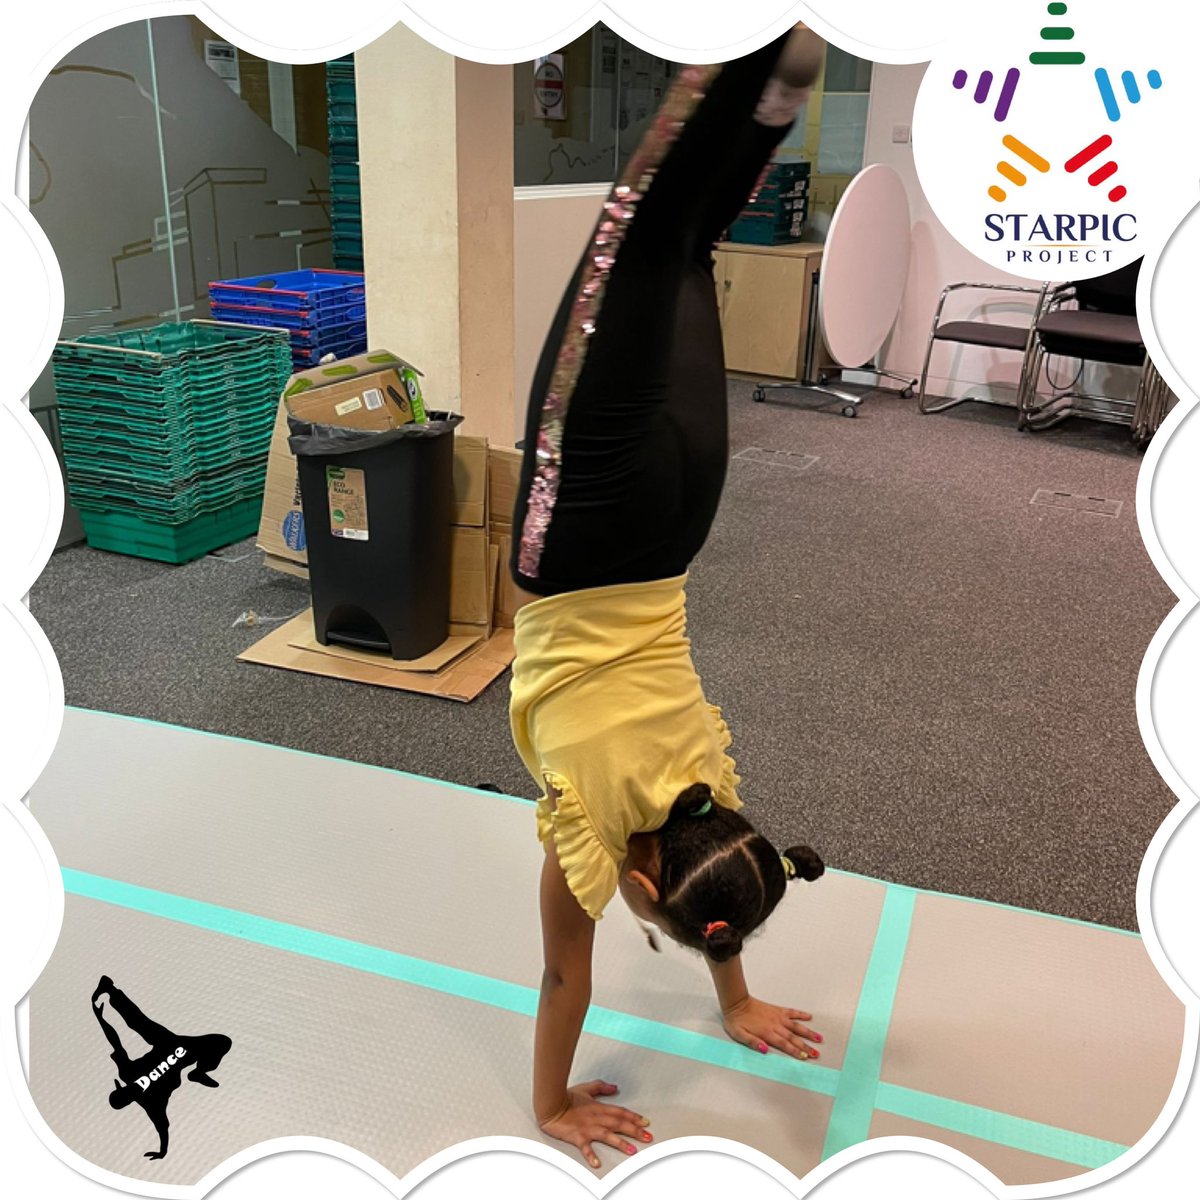 Great energy and efforts at the 'Dance & Fun Gymnastics'. Making it all free and accessible for the community. 
_________________________
#gymnastics #dance #starpicproject #starpicdance

@placesforpeople 
@youth_scotland  @scotgymstagram @StarpicProject @ActiveSchoolsED